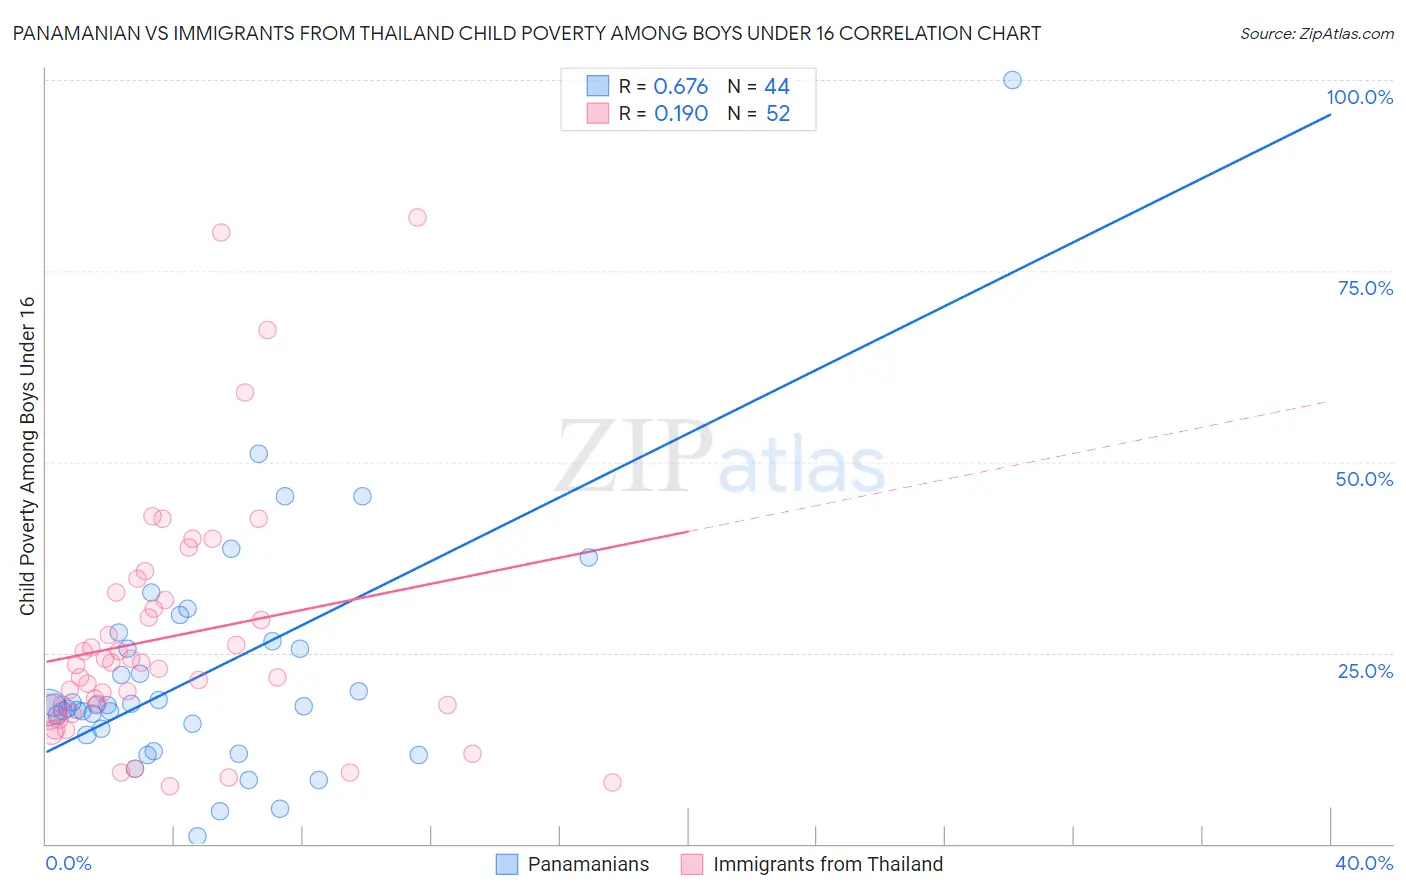 Panamanian vs Immigrants from Thailand Child Poverty Among Boys Under 16